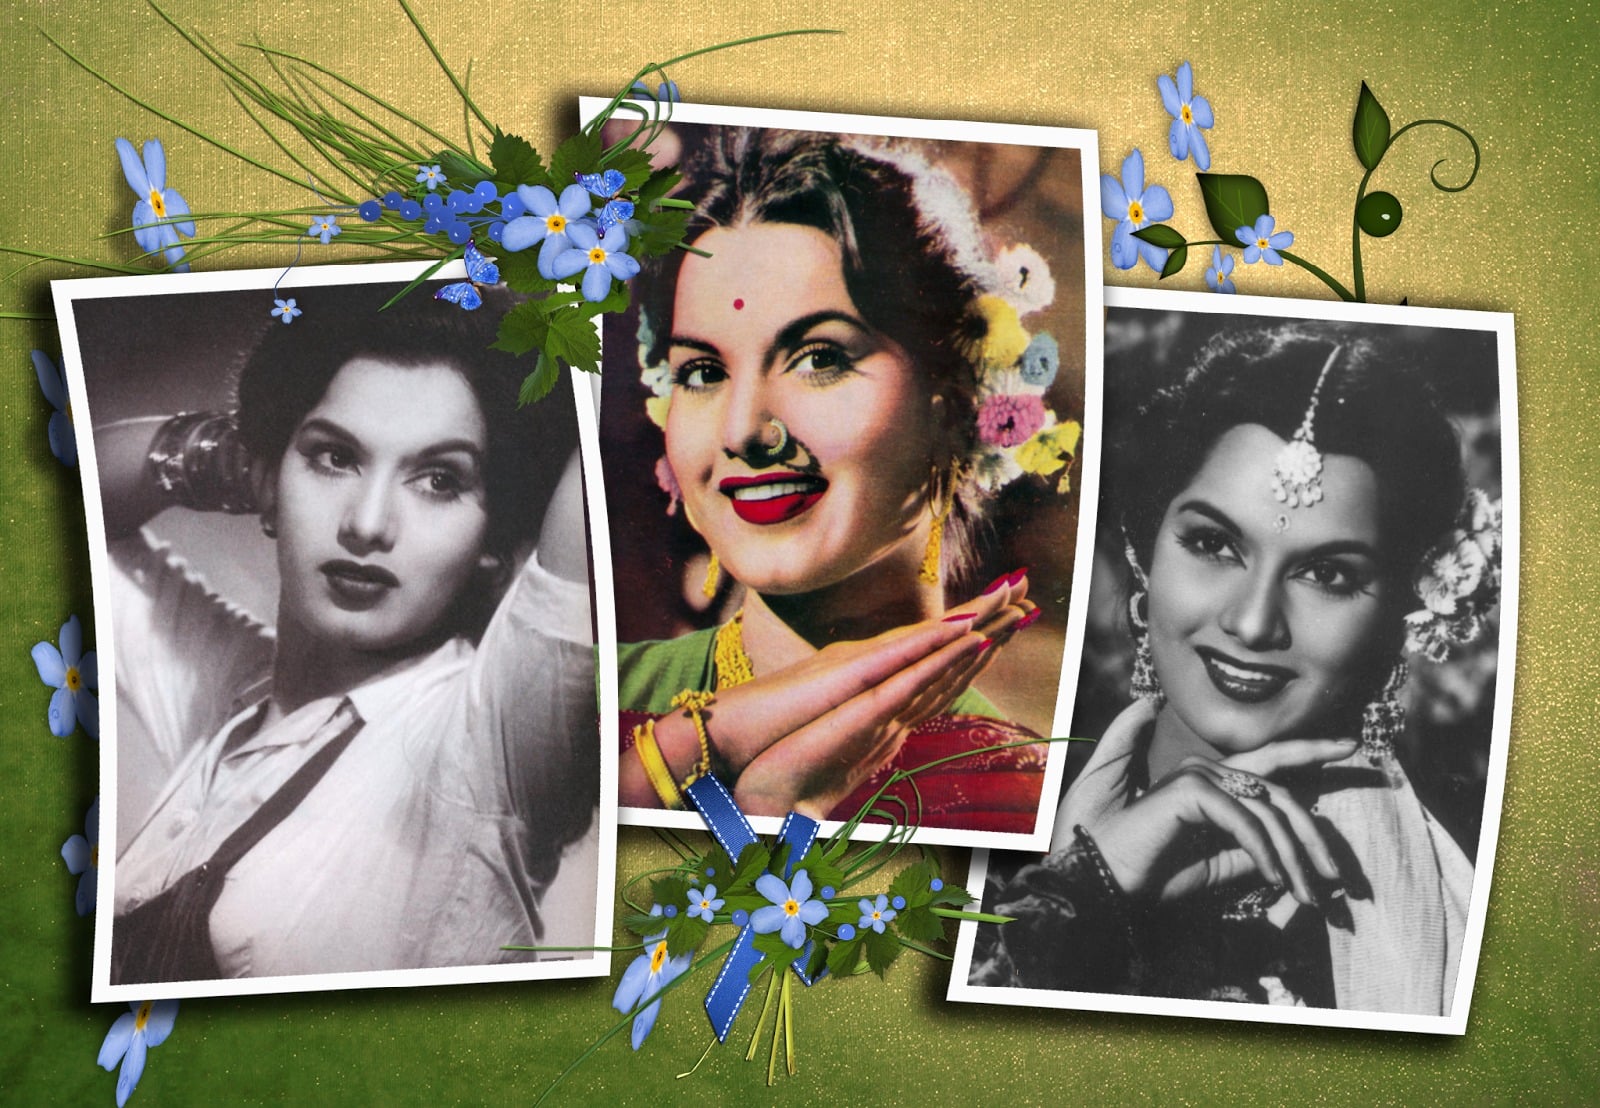 Read more about the article “Lovely & Lively Actress whom Millions adored”